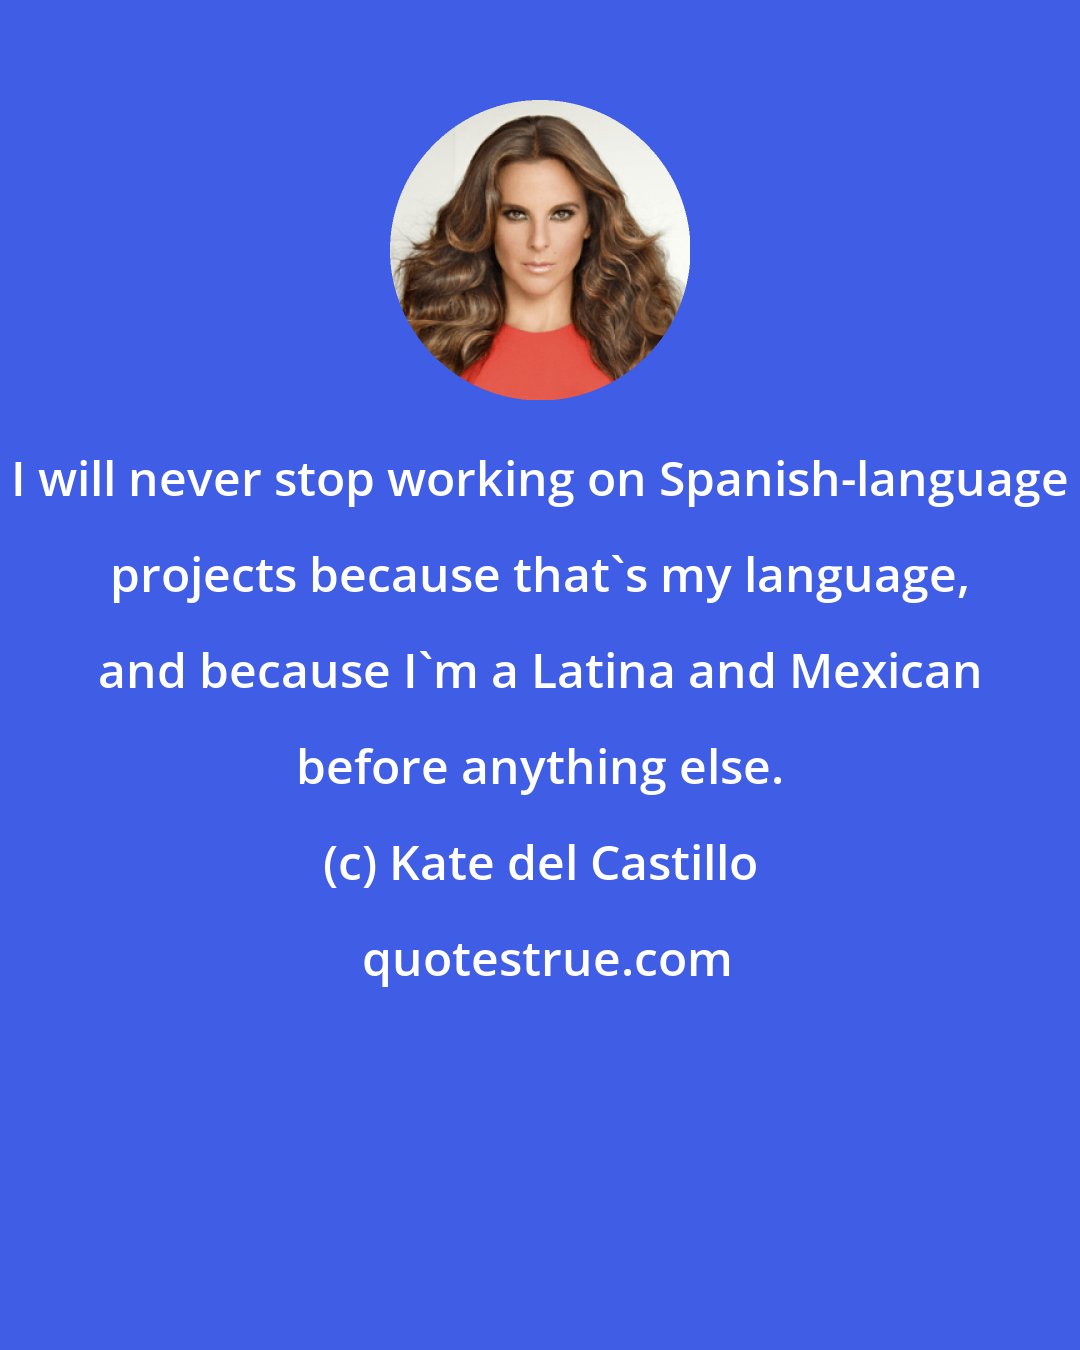 Kate del Castillo: I will never stop working on Spanish-language projects because that's my language, and because I'm a Latina and Mexican before anything else.